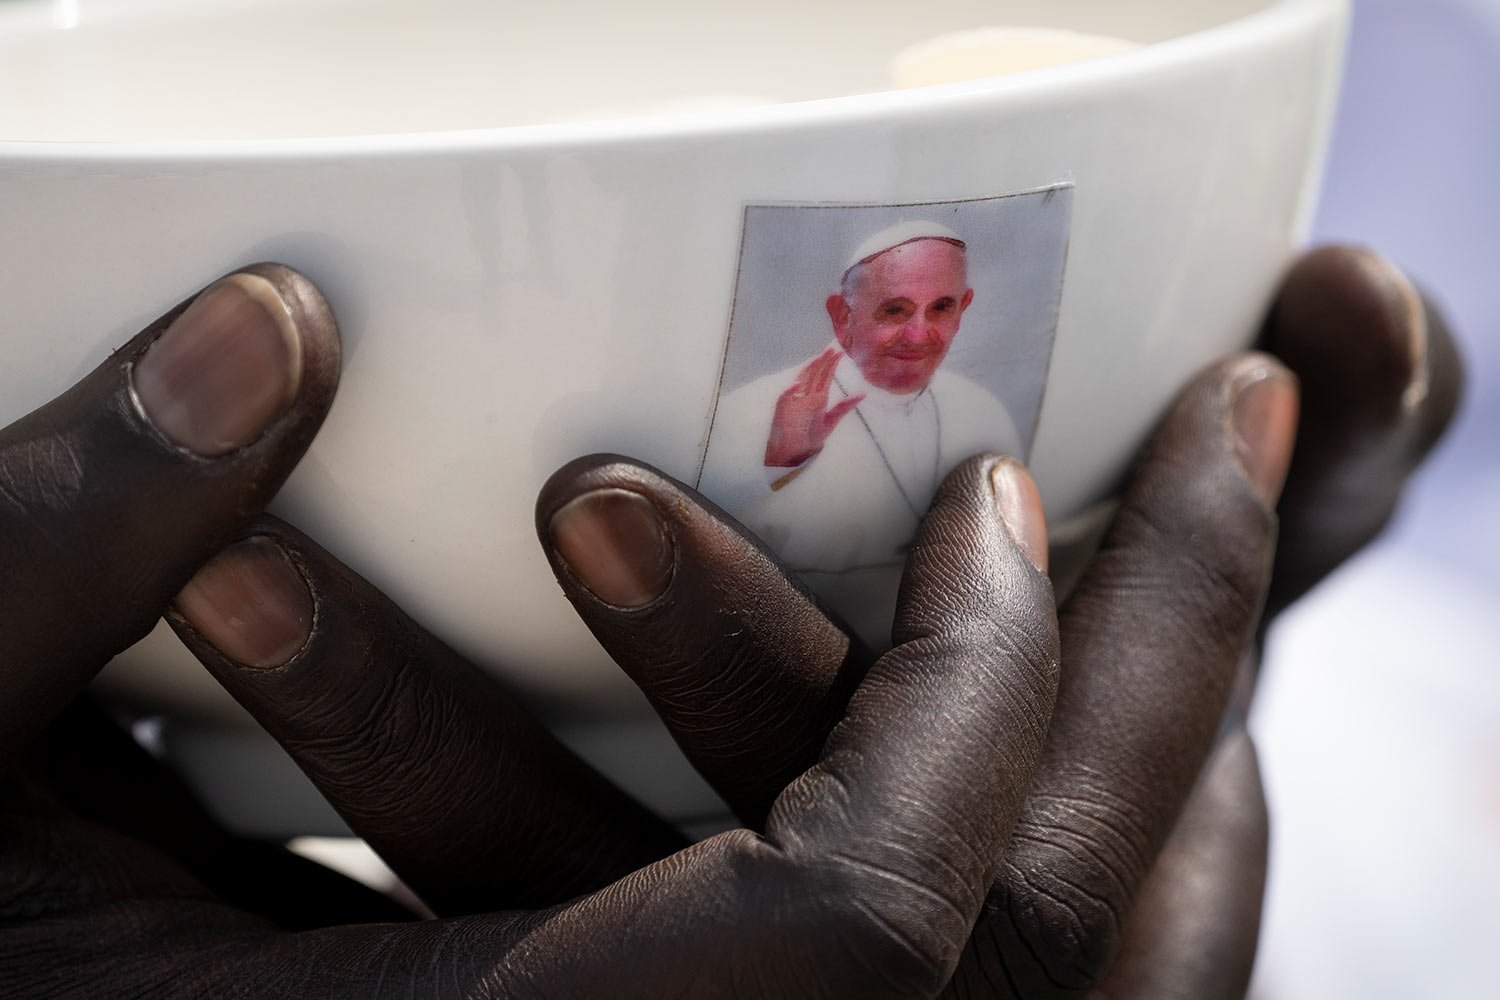  A priest holds a sacrament bowl showing a photograph of Pope Francis at a Holy Mass at the John Garang Mausoleum in Juba, South Sudan Sunday, Feb. 5, 2023.  (AP Photo/Ben Curtis) 